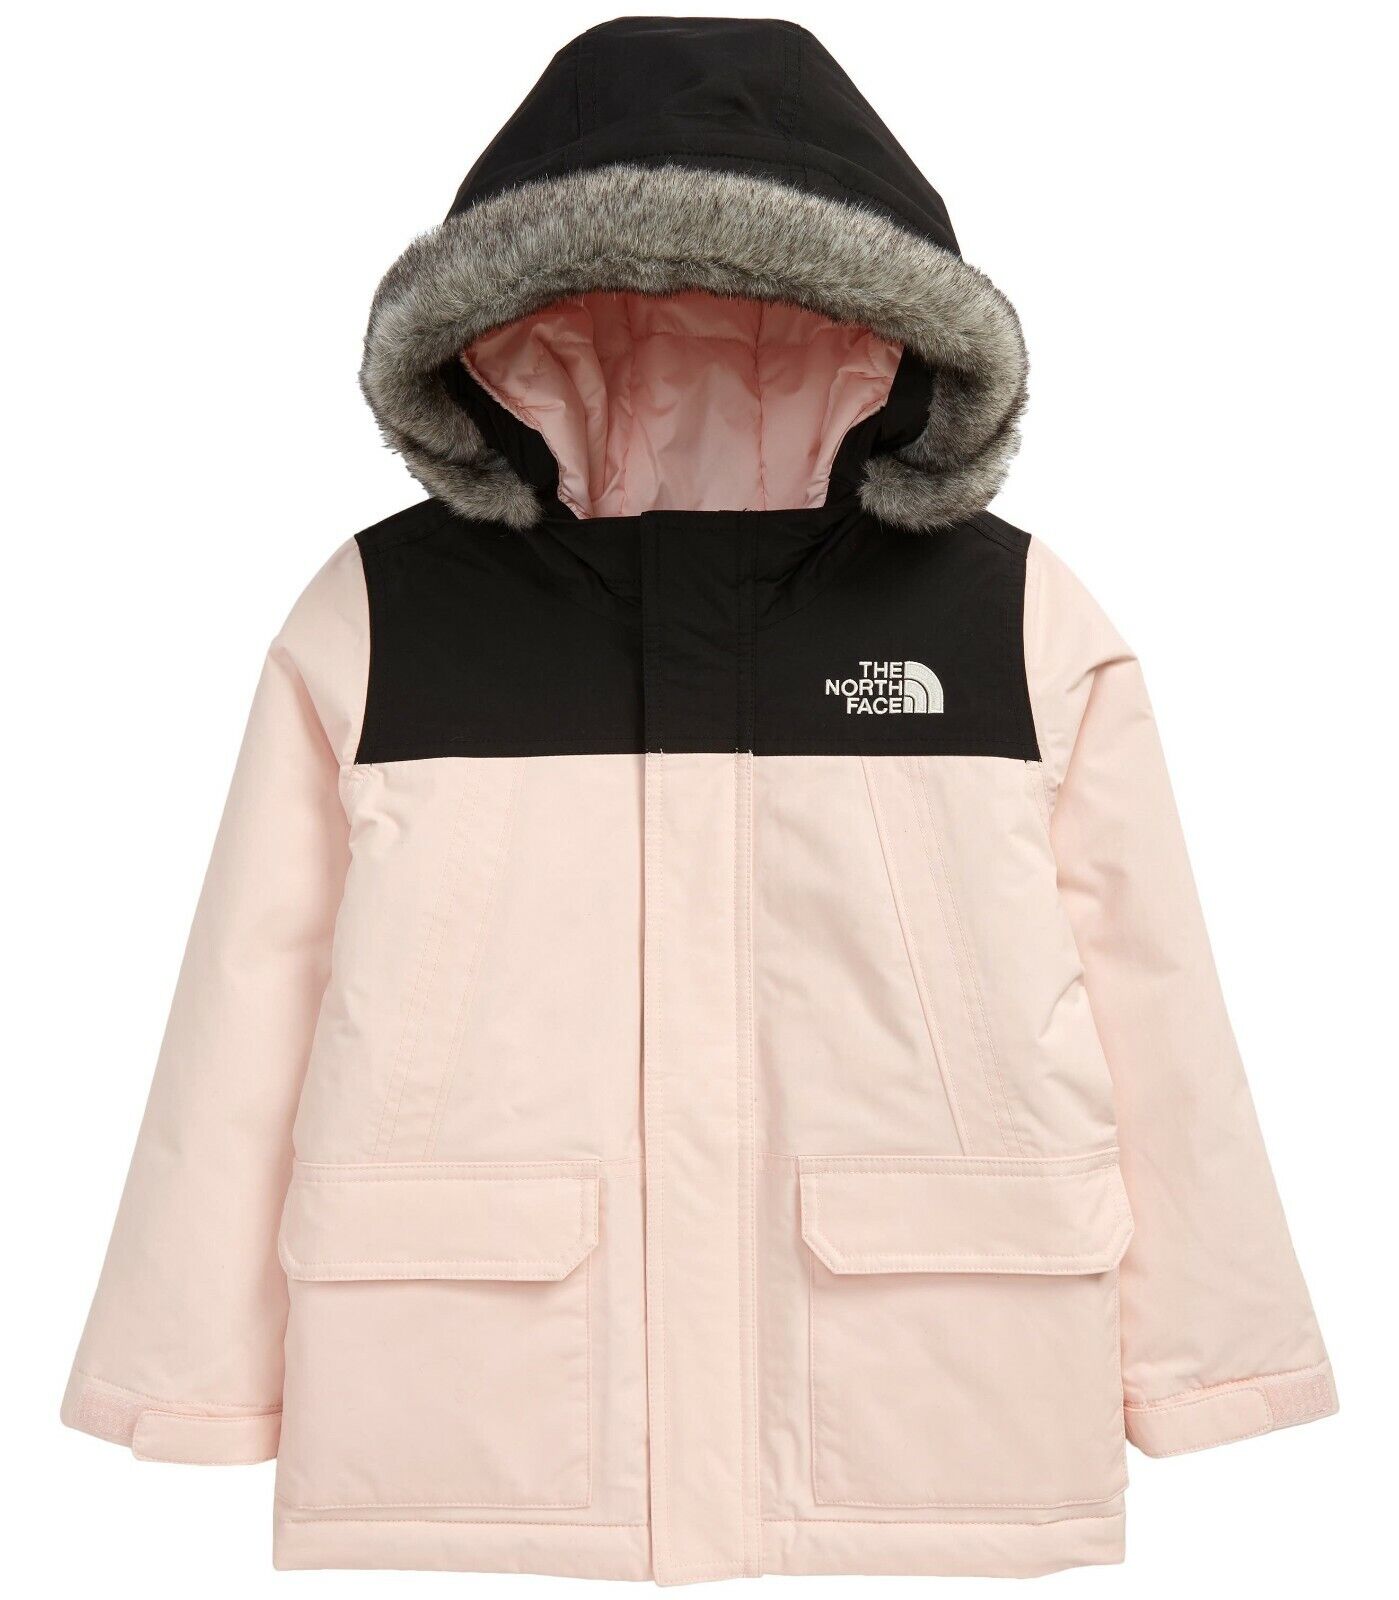 The North Face McMurdo Waterproof Parka Jacket Pink and Black Size 